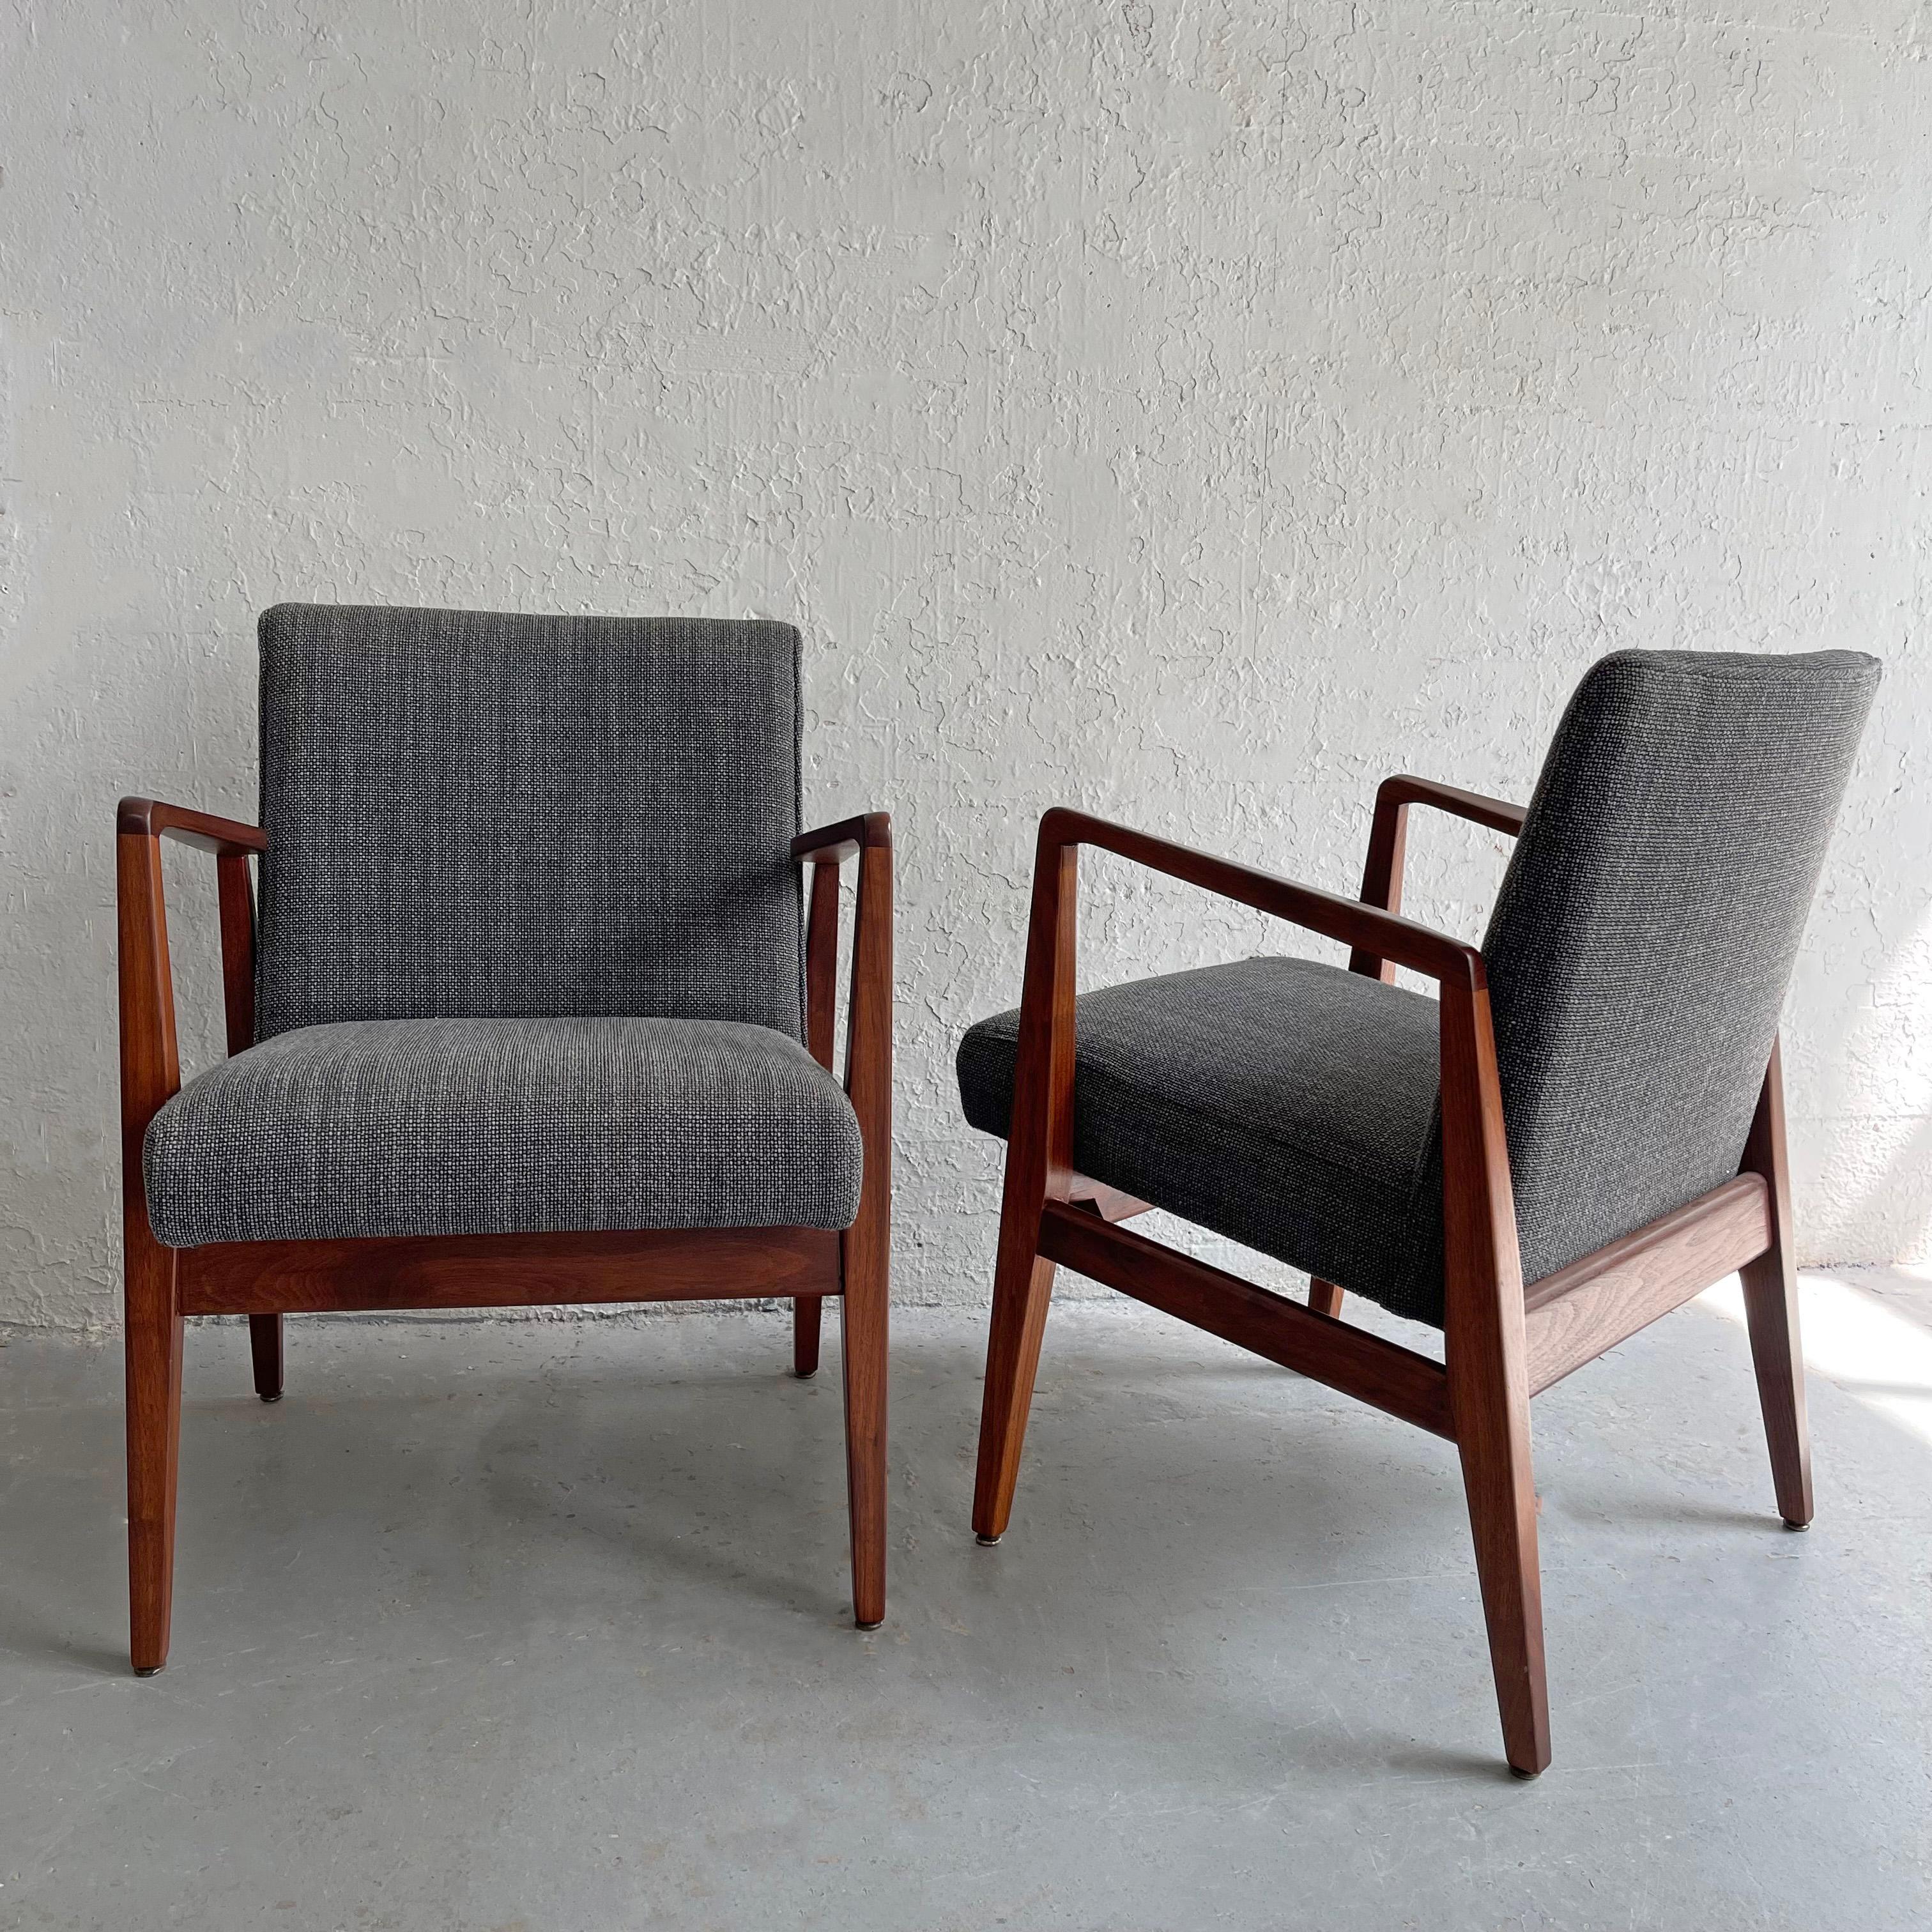 Pair Mid-Century Modern Walnut Armchairs by Jens Risom In Good Condition For Sale In Brooklyn, NY